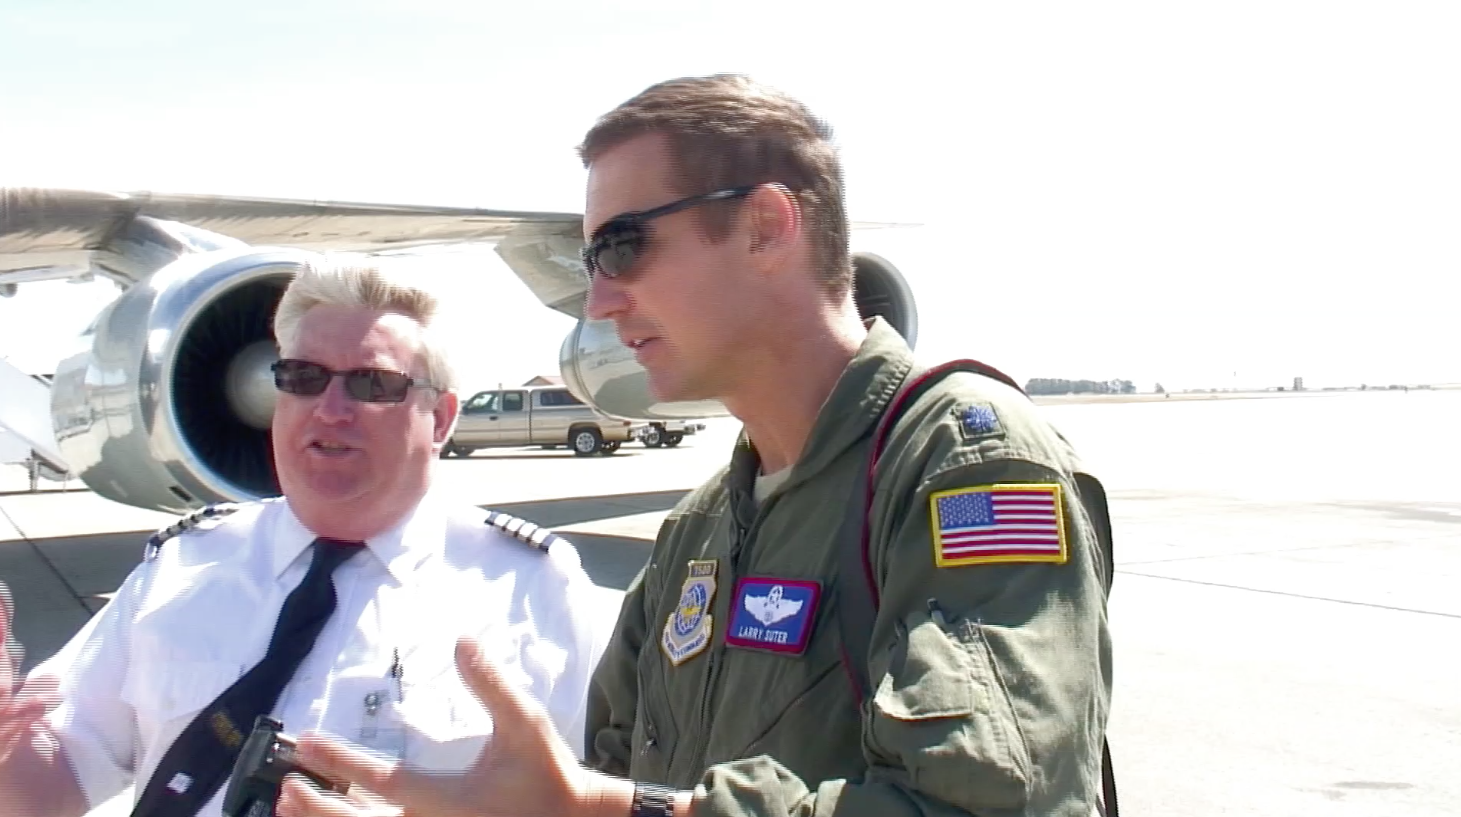 ATI DC-8-62 Captain Brad Watts talks with USAF Lt. Col. Larry Suter about the air conditioning system of the ATI DC-8-62 N799AL on the ramp at Travis AFB on May 12, 2013. This is a screenshot from the 9 episode mini series "DC-8 Farewell" that streams on the JetFlix TV streaming service for aviation super fans.